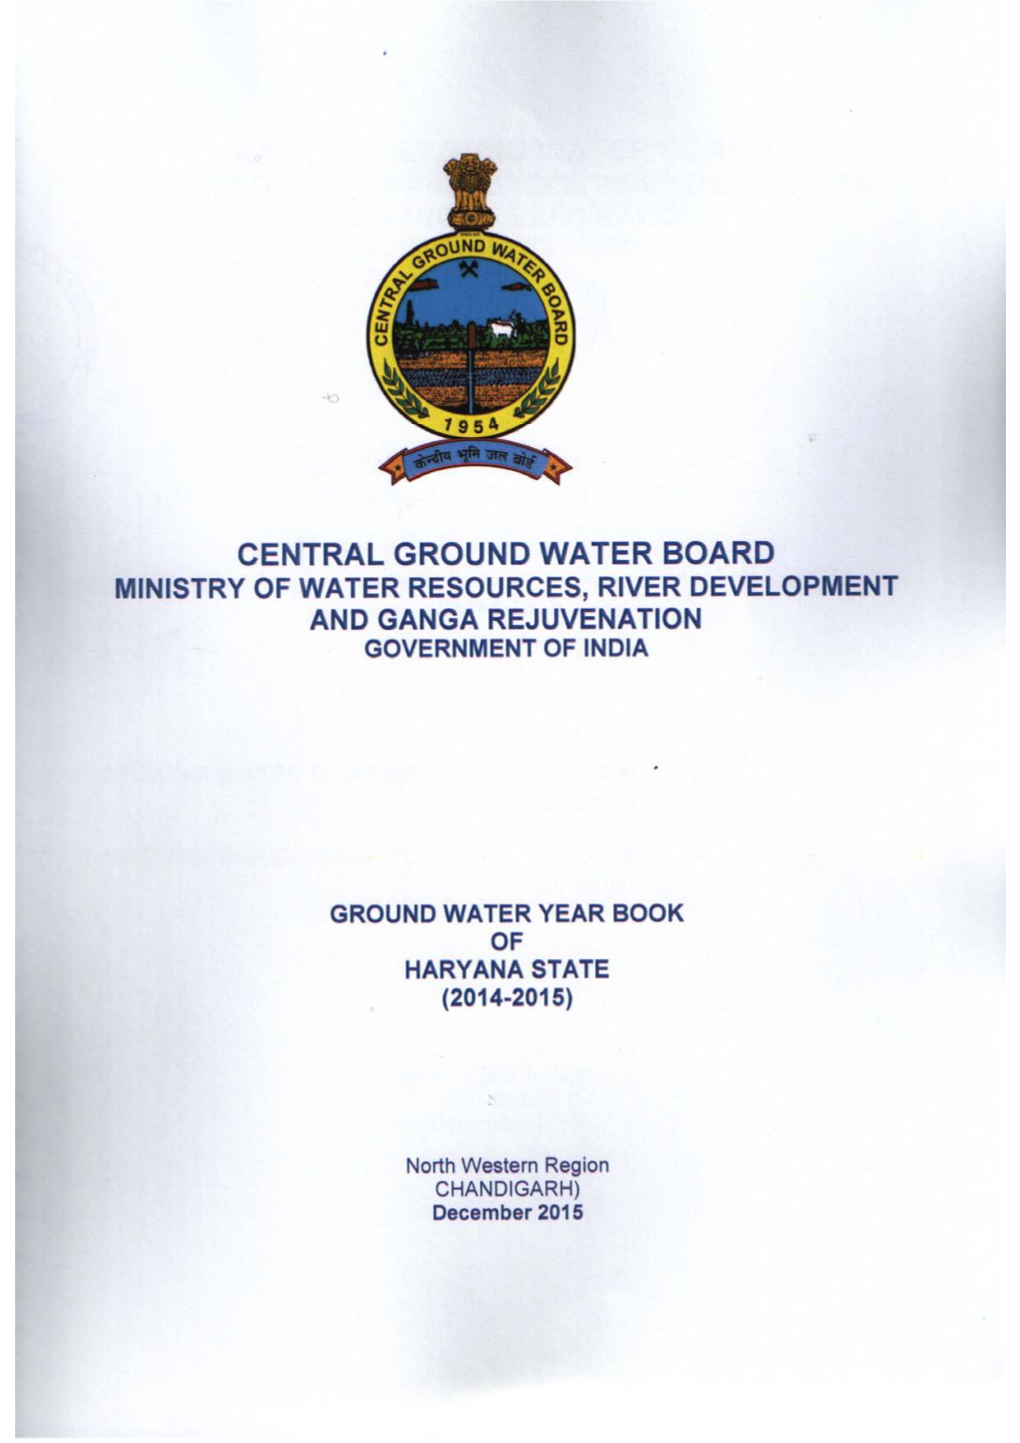 GROUND WATER YEAR BOOK HARYANA STATE 2014 - 2015 1 INTRODUCTION the State of Haryana Is in North India with Its Capital at Chandigarh